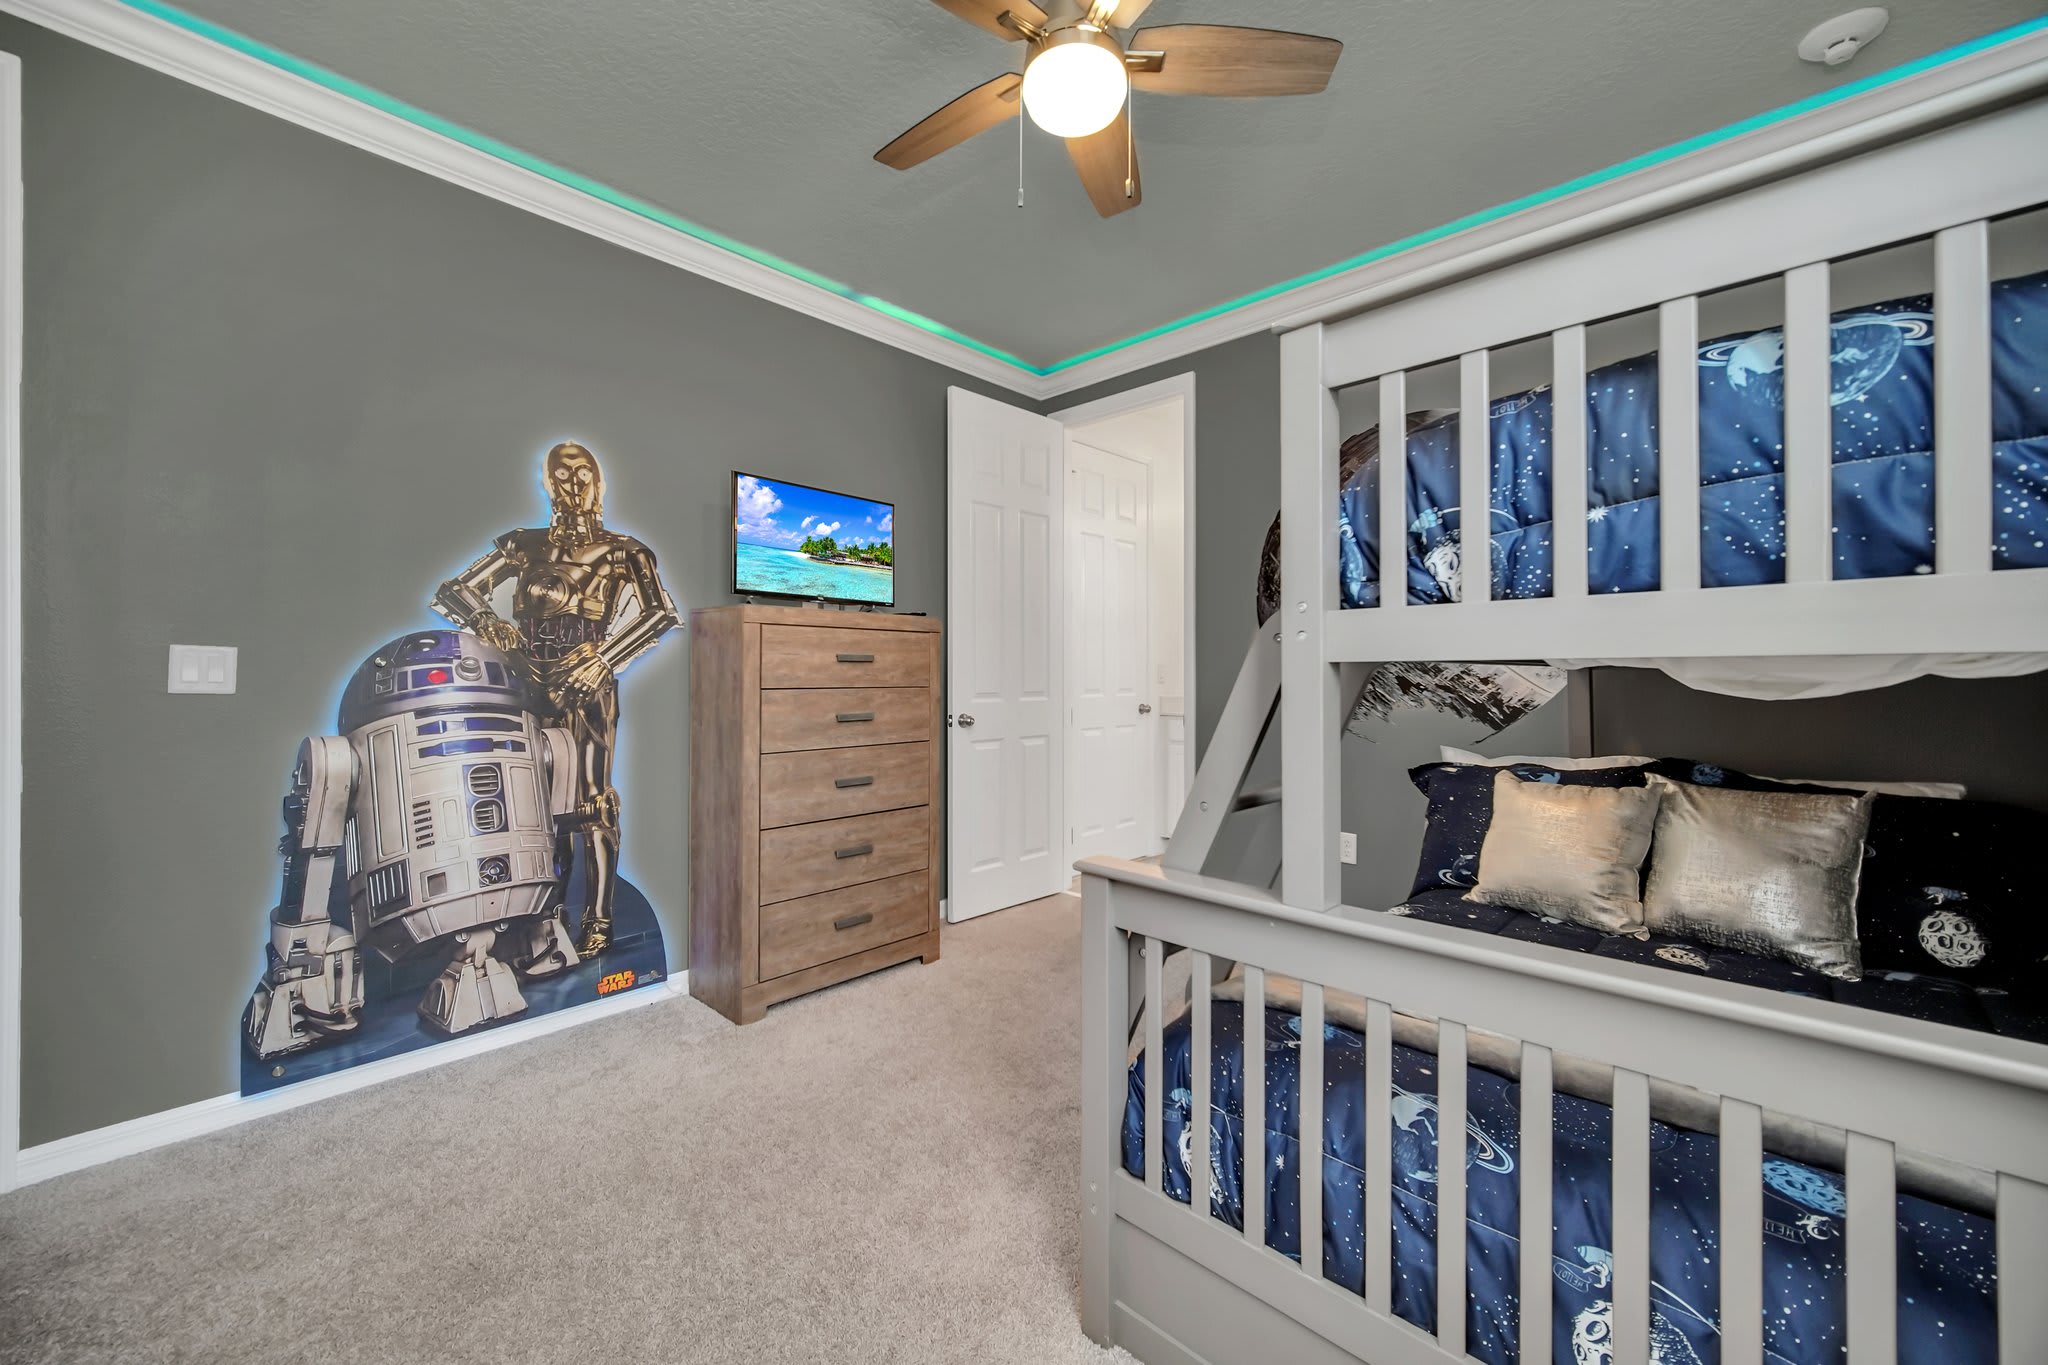 Star Wars Themed Bedroom with Bunk Beds and Ceiling Lighting